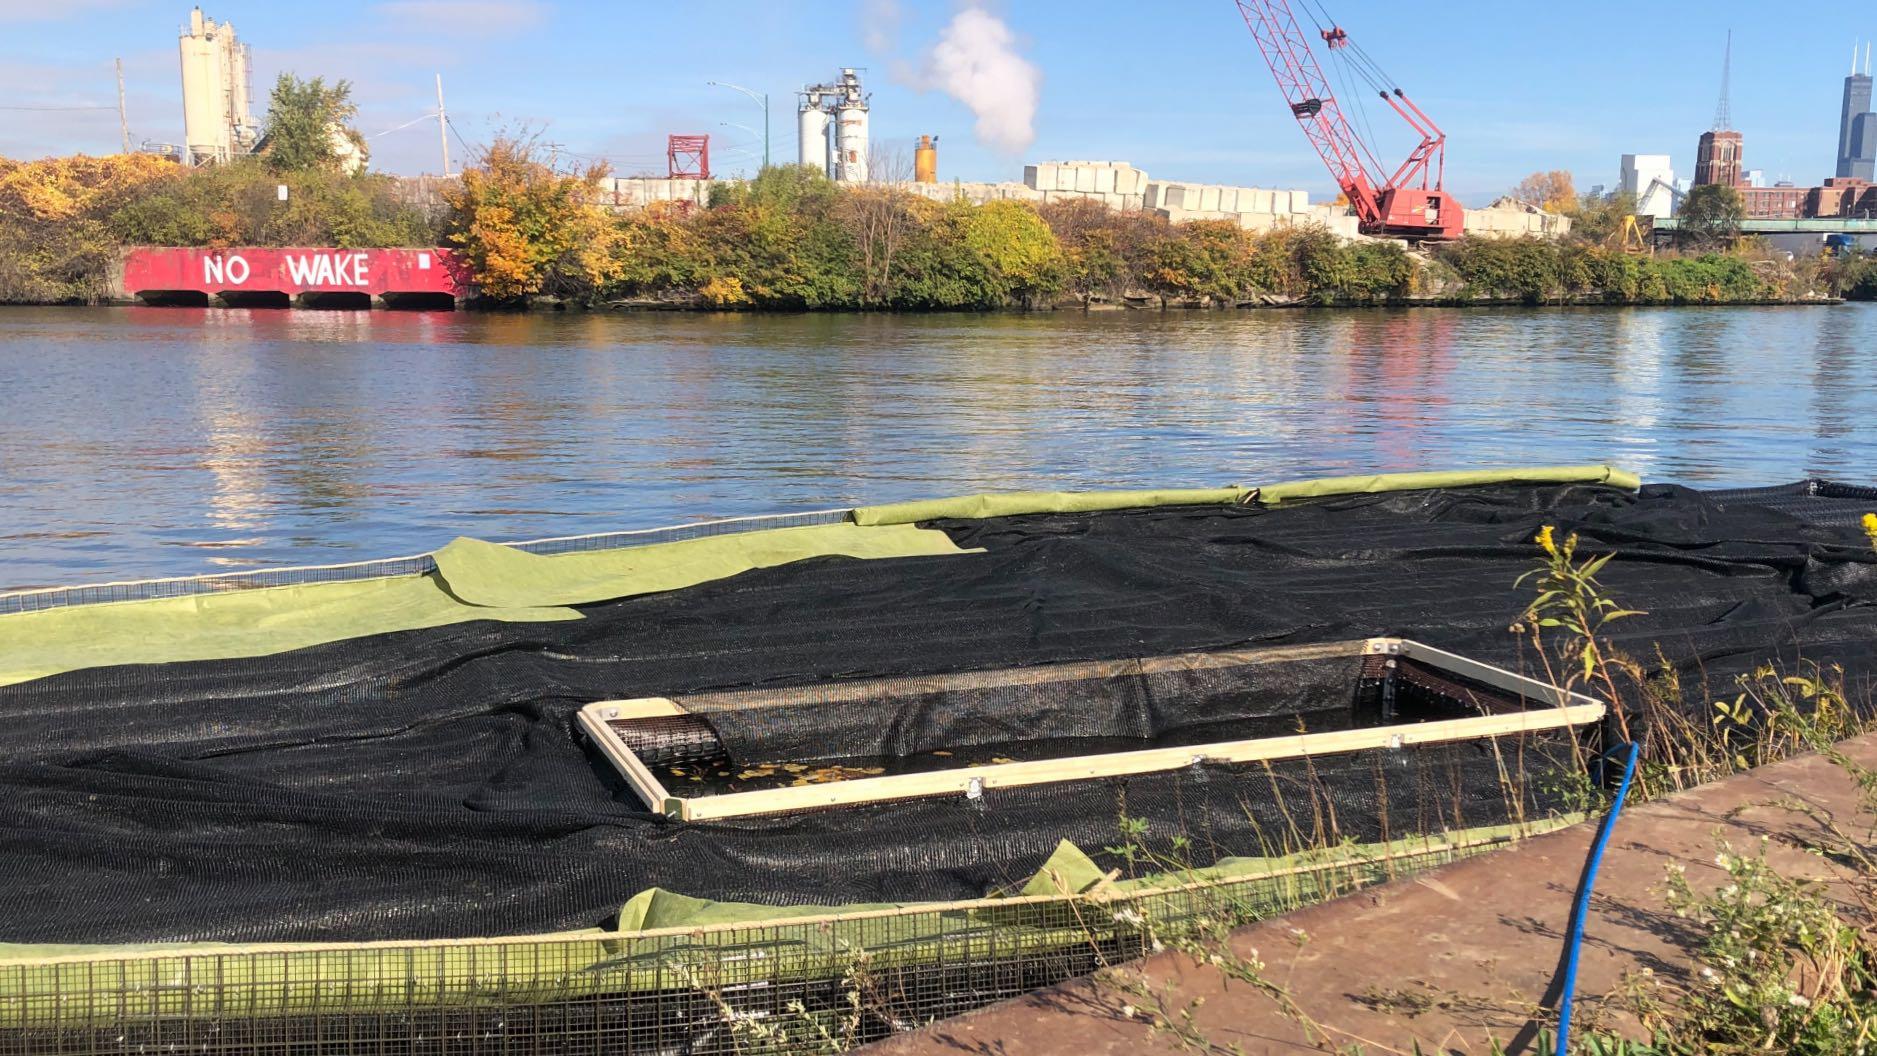 Floating wetland under construction in fall 2022 at Bubbly Creek. (Patty Wetli / WTTW News)